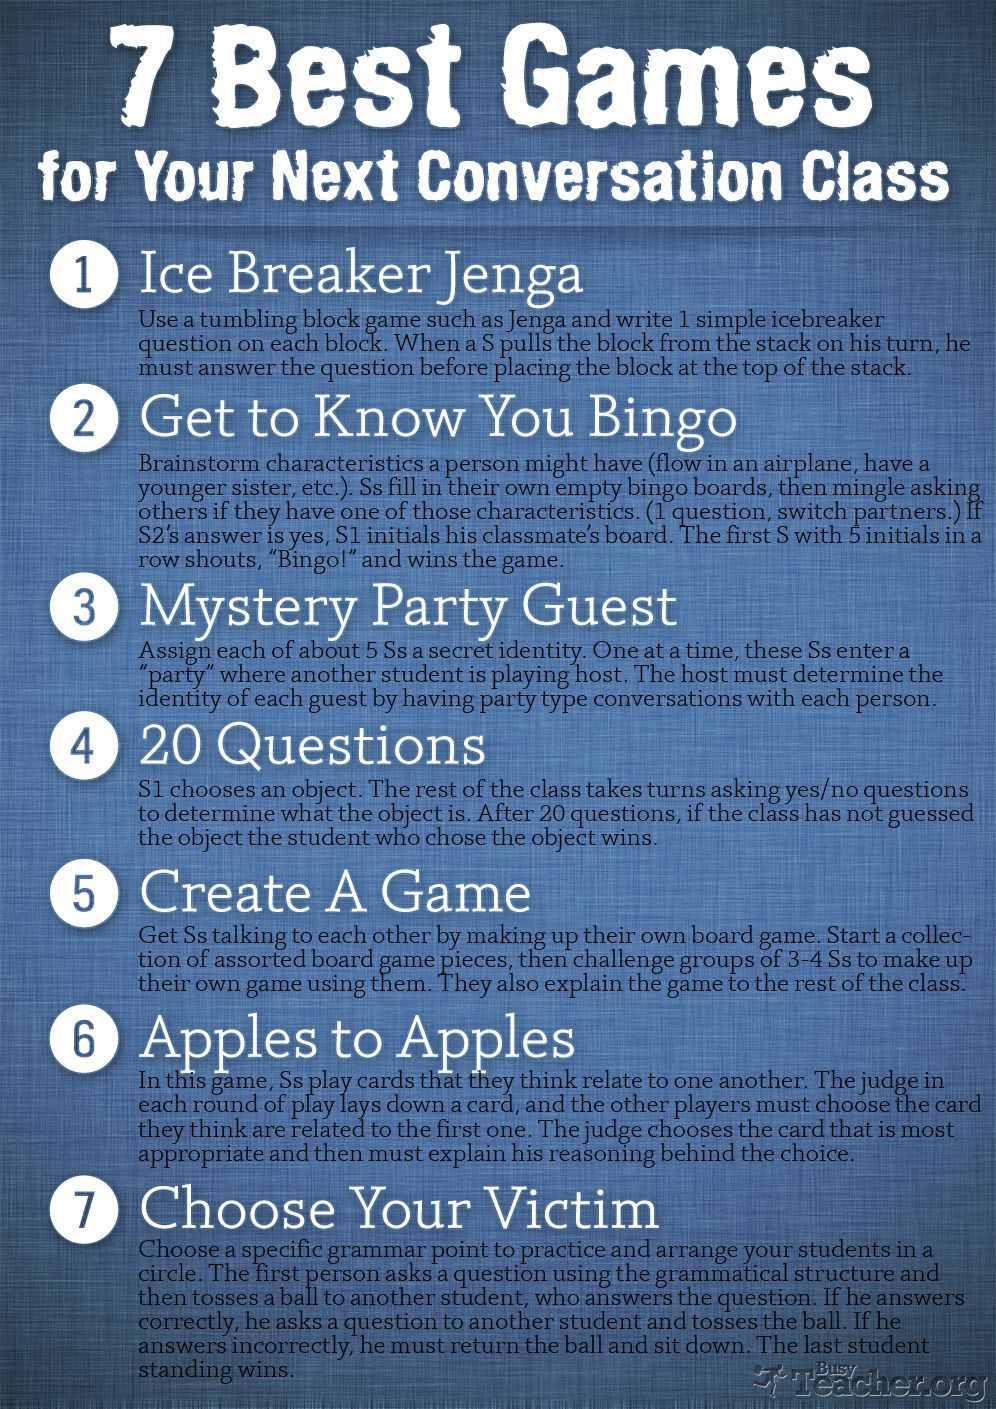 POSTER: 7 Best Games for Your Next Conversation Class